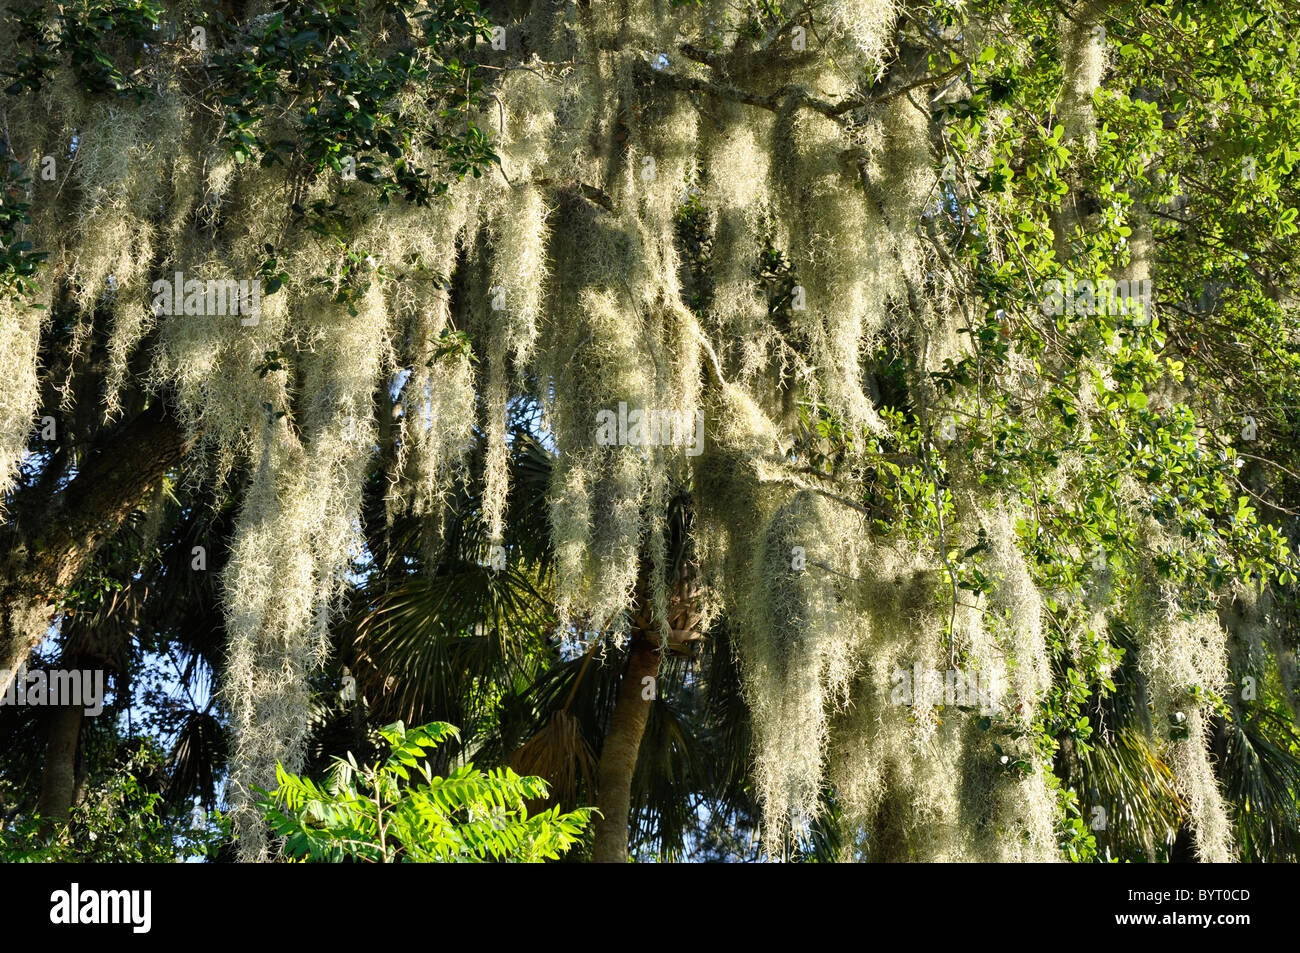 Spanish moss is a flowering plant that grows on larger trees, commonly the Southern Live Oak in the southeastern United States. Stock Photo